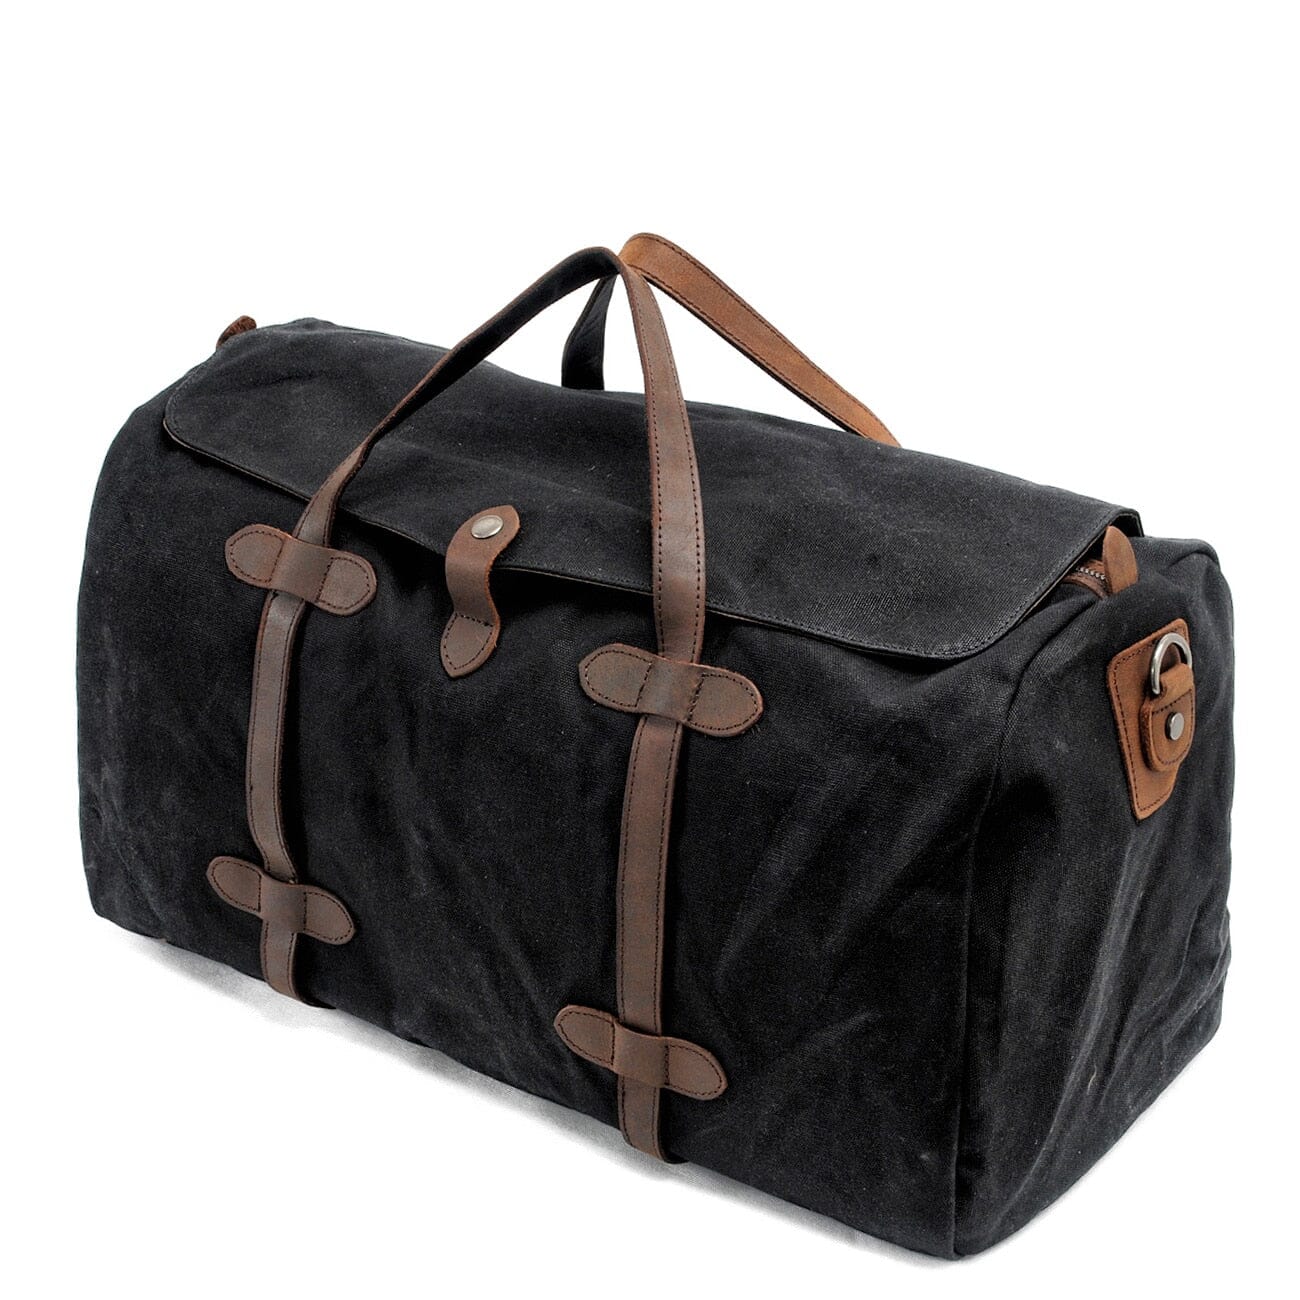 Western Overnight Bag The Store Bags Black 